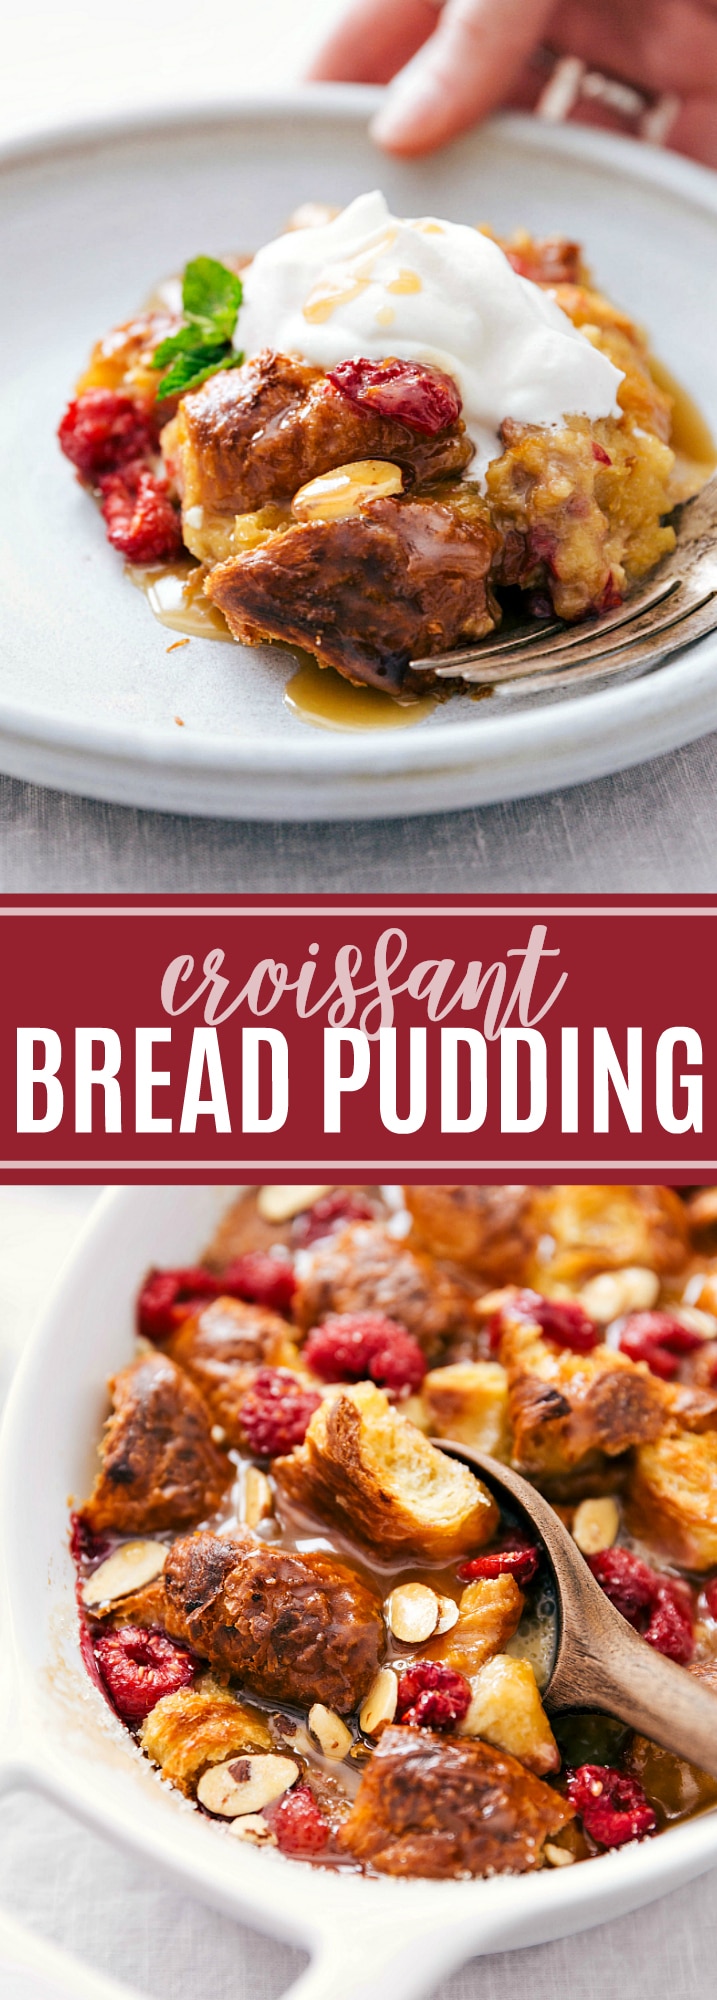 The best homemade bread pudding recipe with fresh raspberries, whipped cream, and a delicious vanilla sauce. Tips & tricks plus a few 